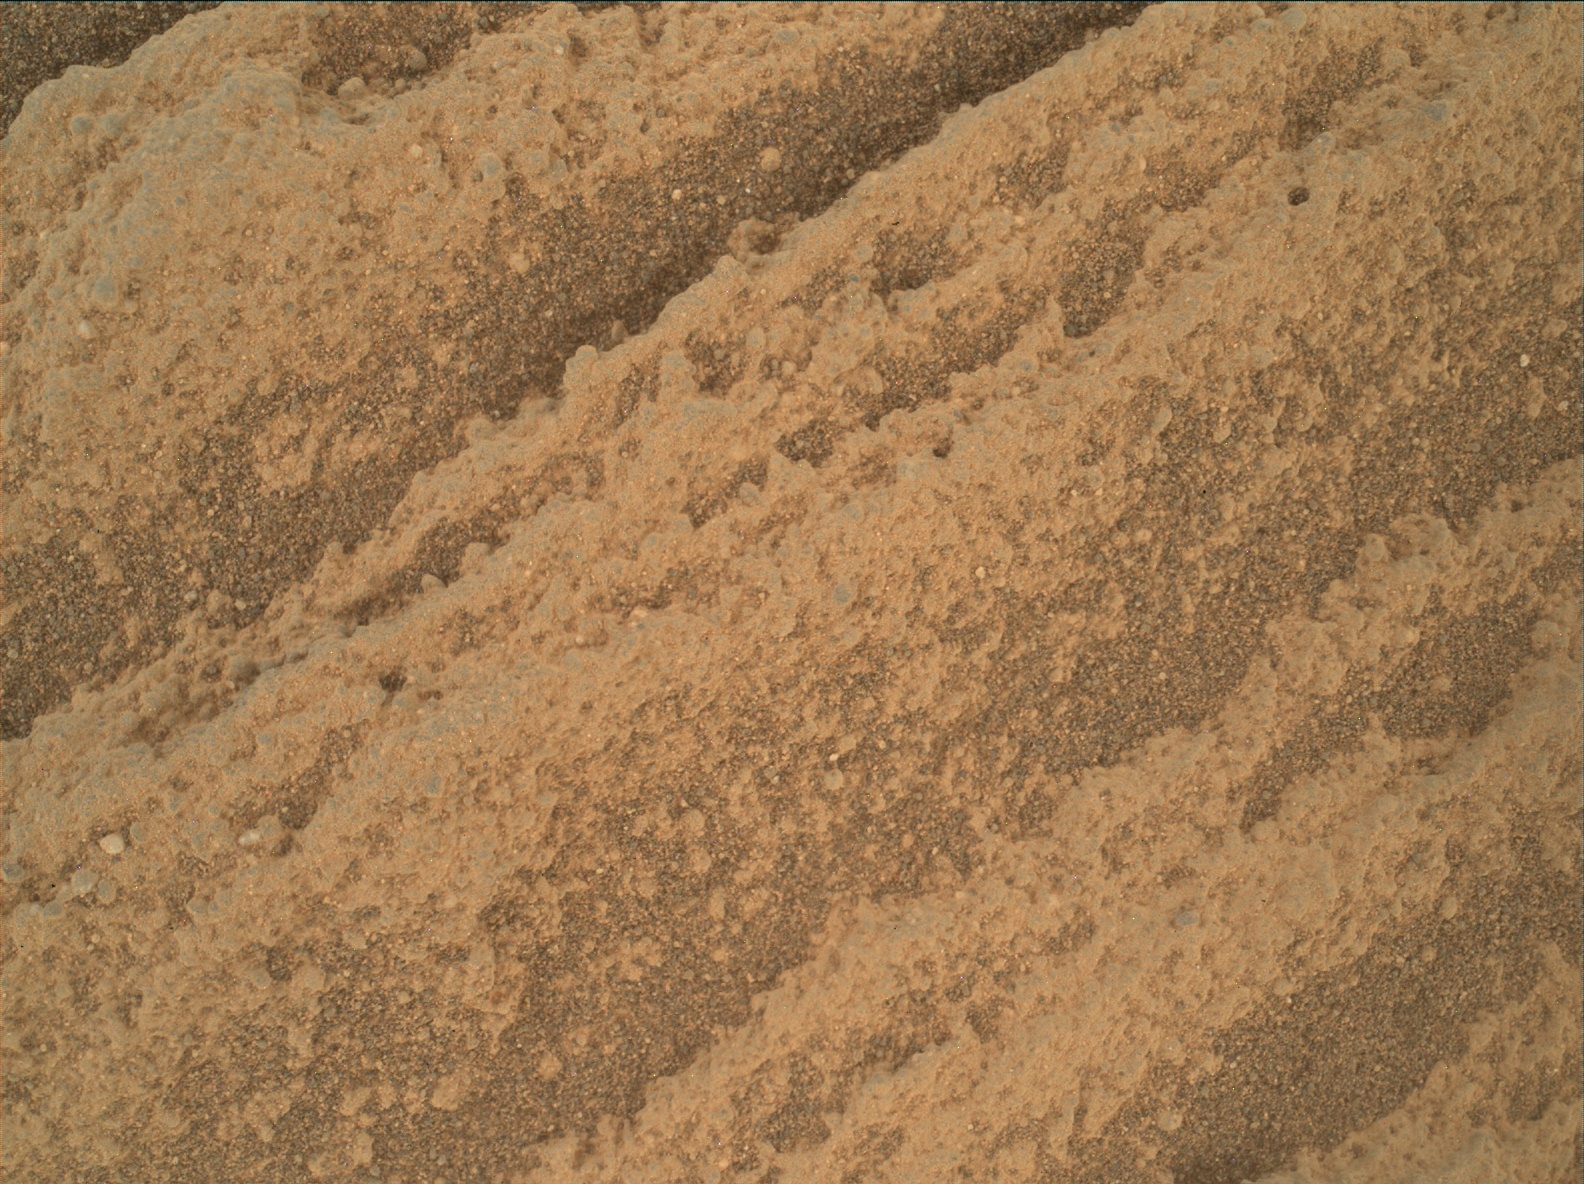 Nasa's Mars rover Curiosity acquired this image using its Mars Hand Lens Imager (MAHLI) on Sol 2698